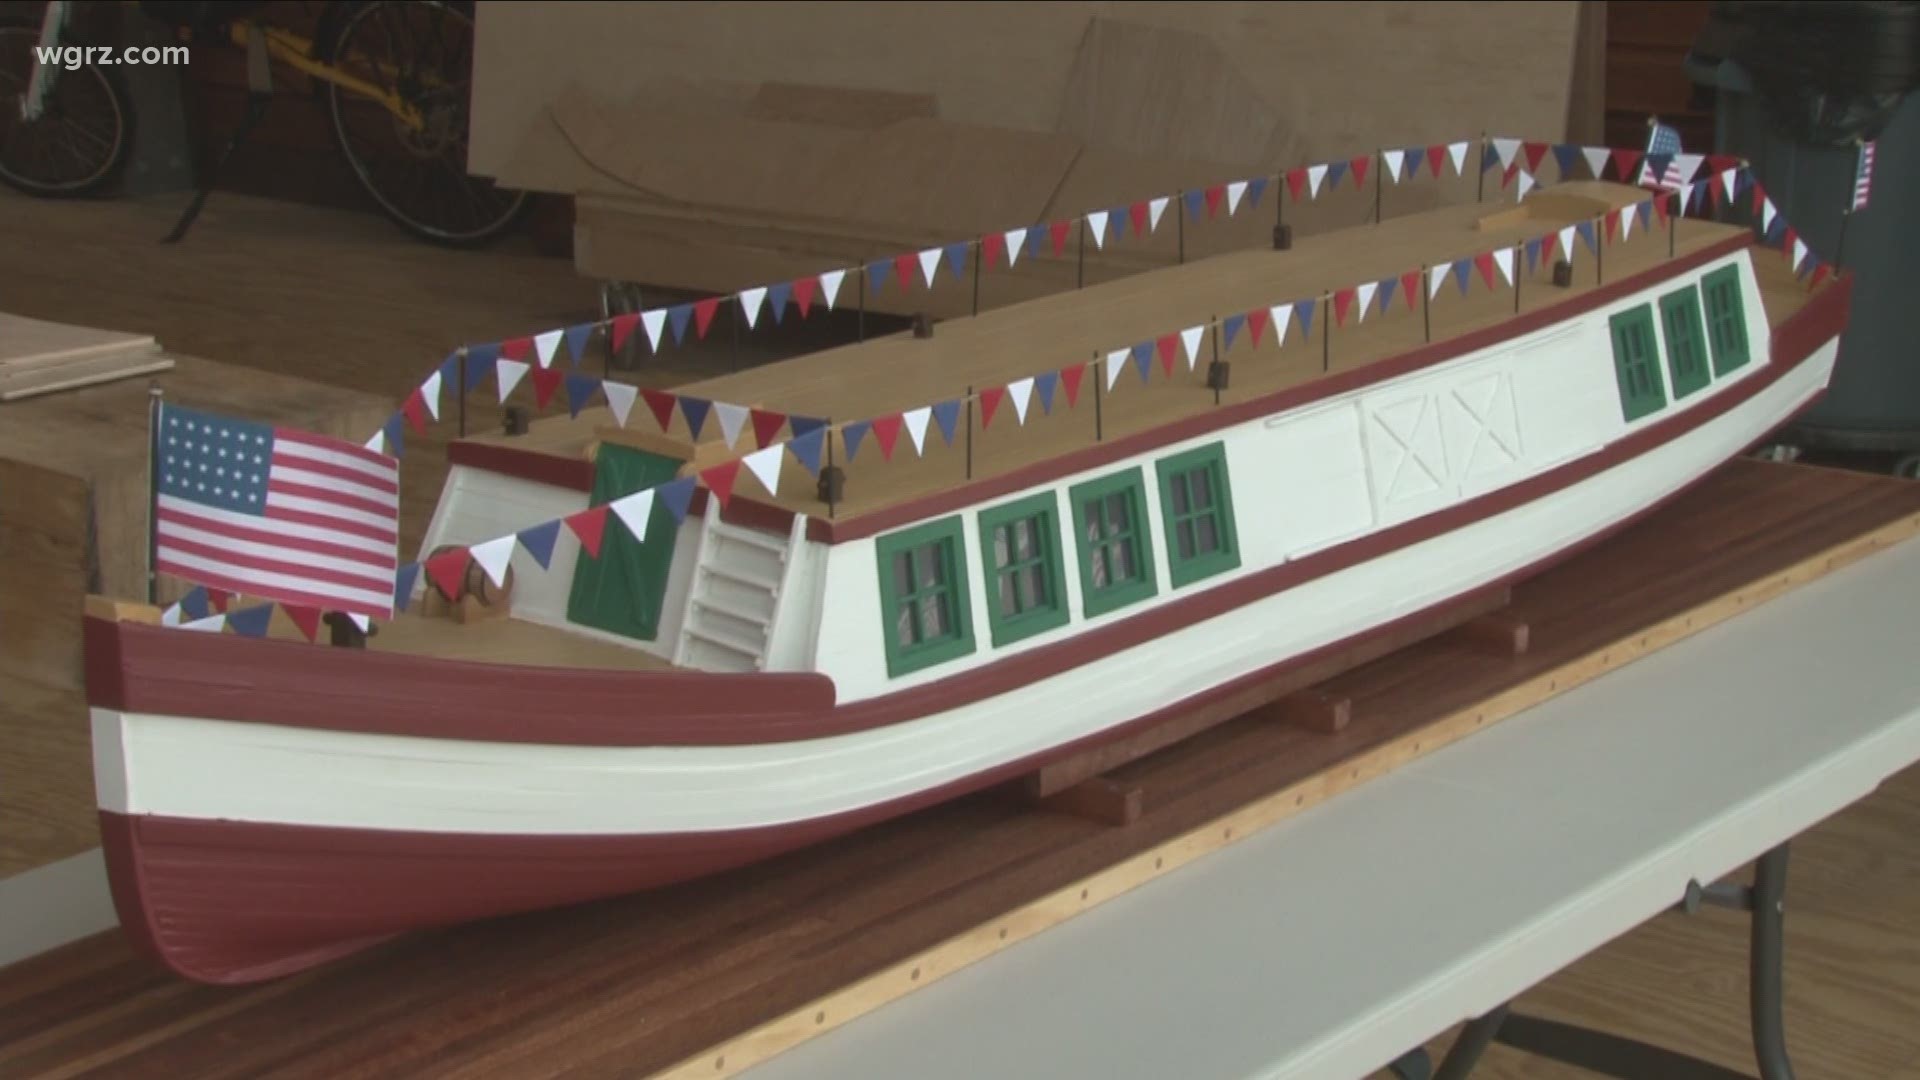 Work continues on Packet Boat at Canalside